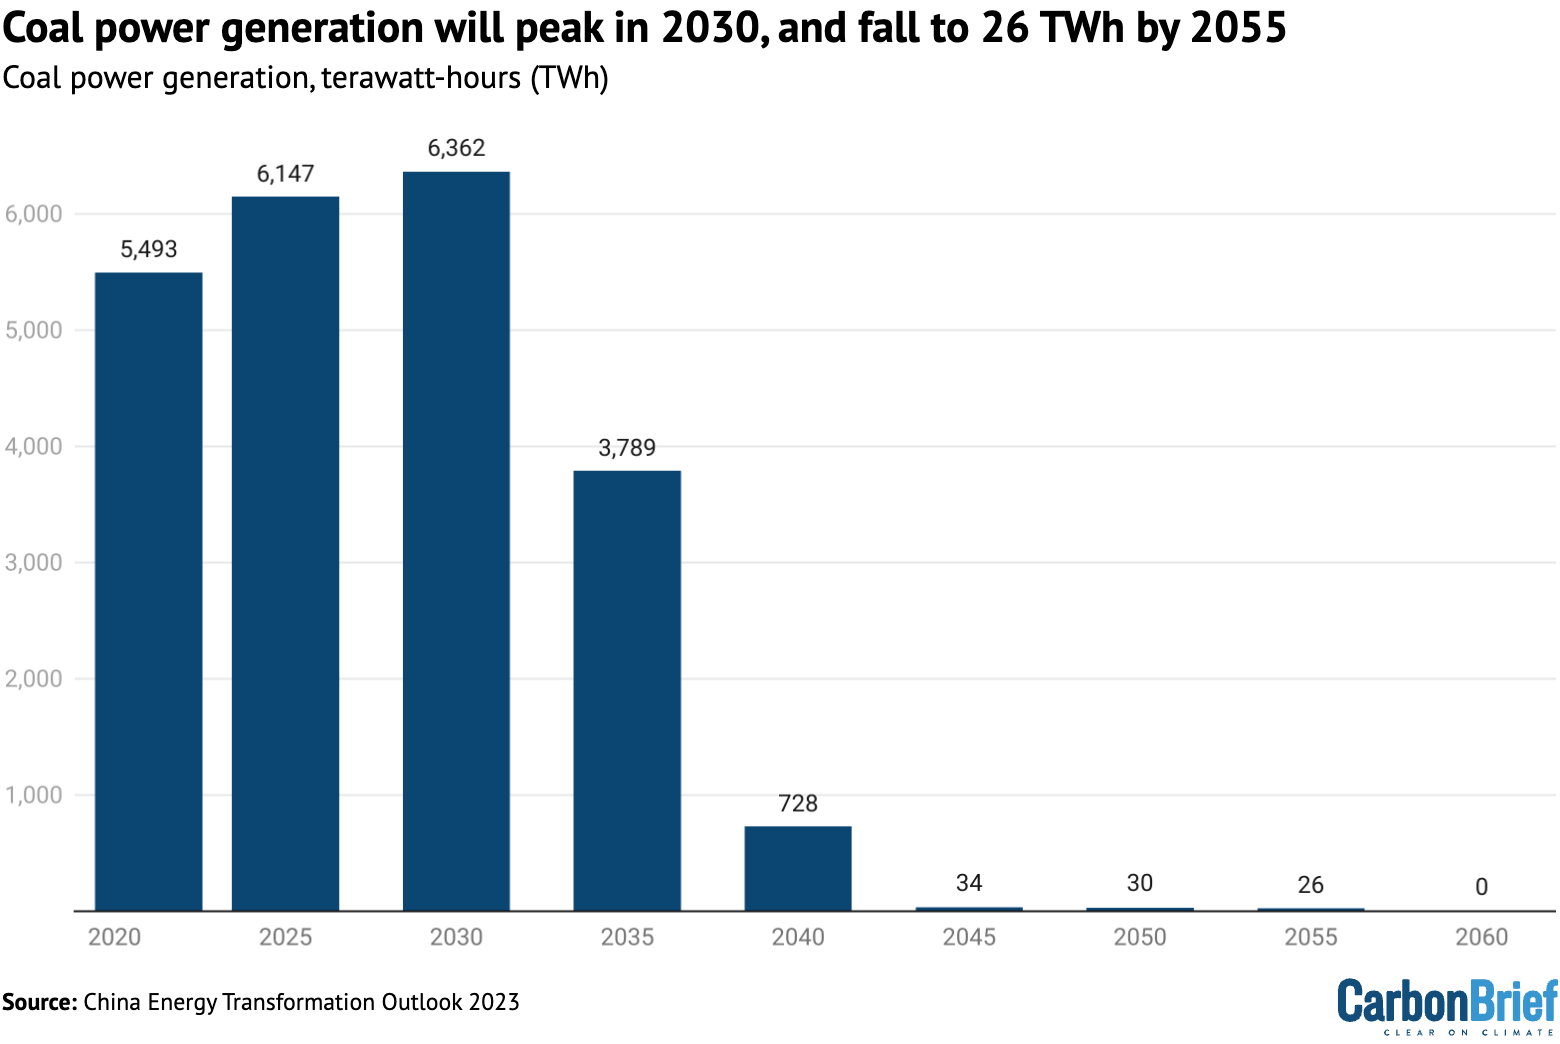 Coal power generation will peak in 2030, and fall to 26TWh by 2055